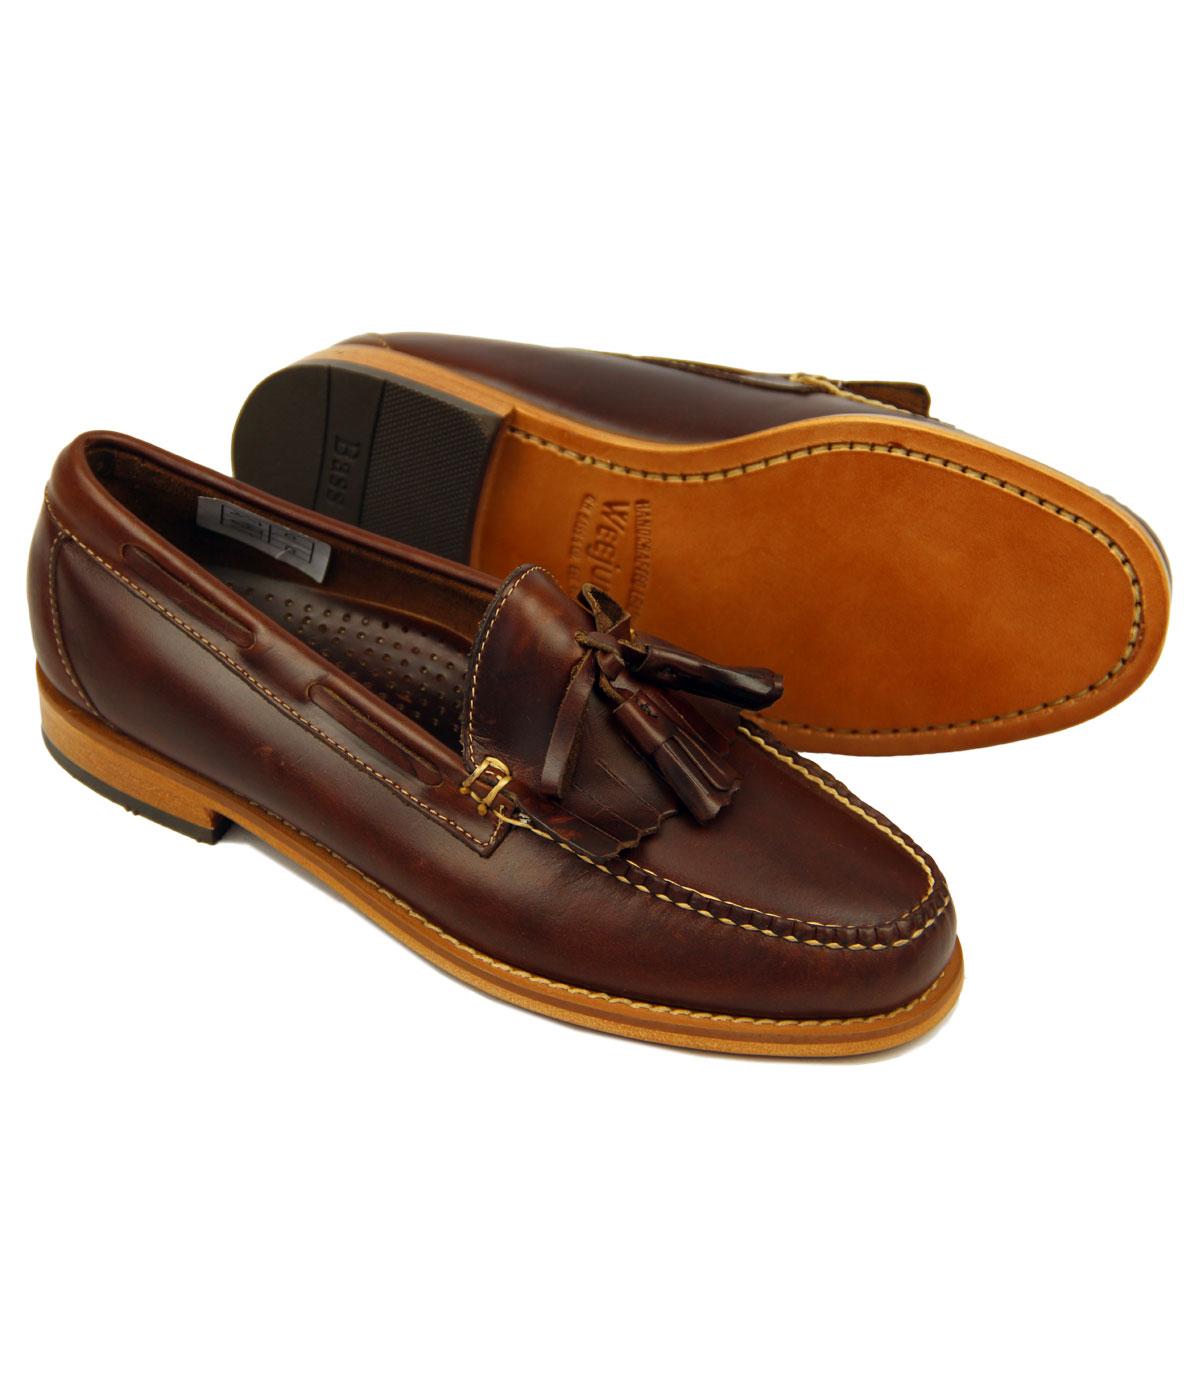 BASS WEEJUNS Layton Pull Up Retro Mod Brown Tassel Fringe Loafers